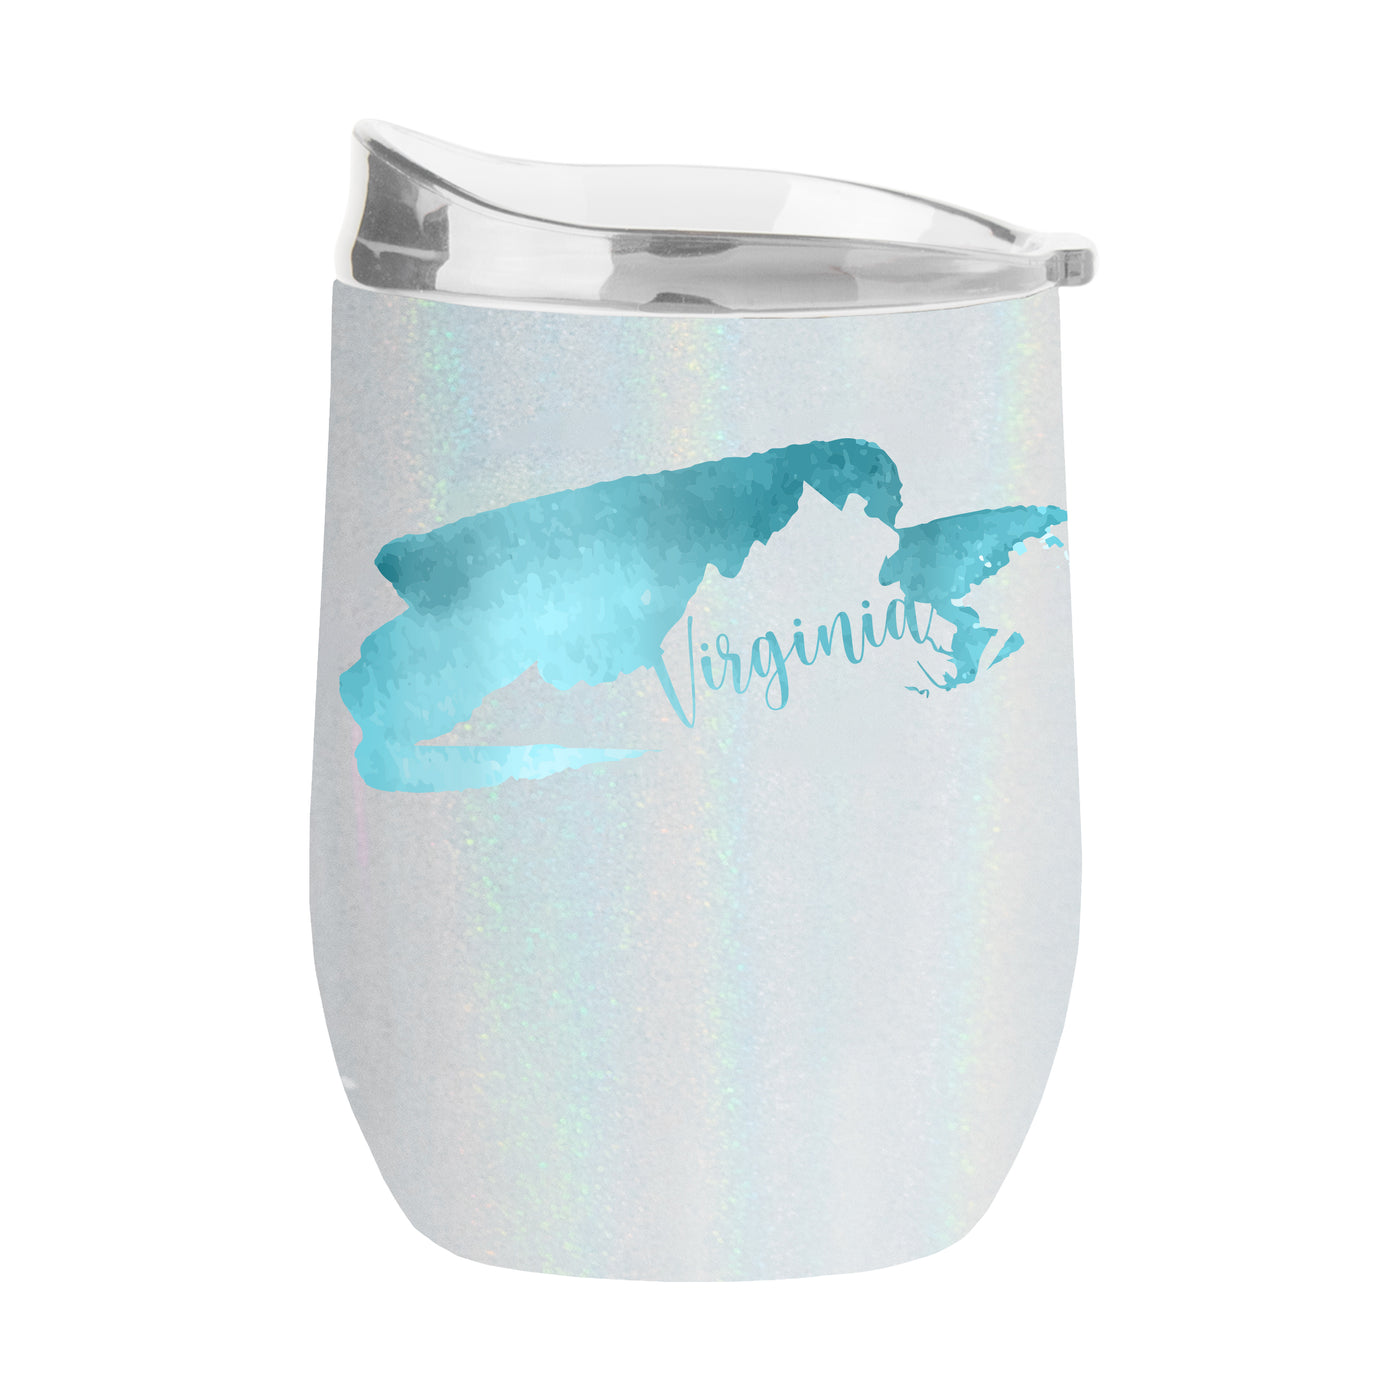 State of Virginia 16oz Iridescent Curved Beverage